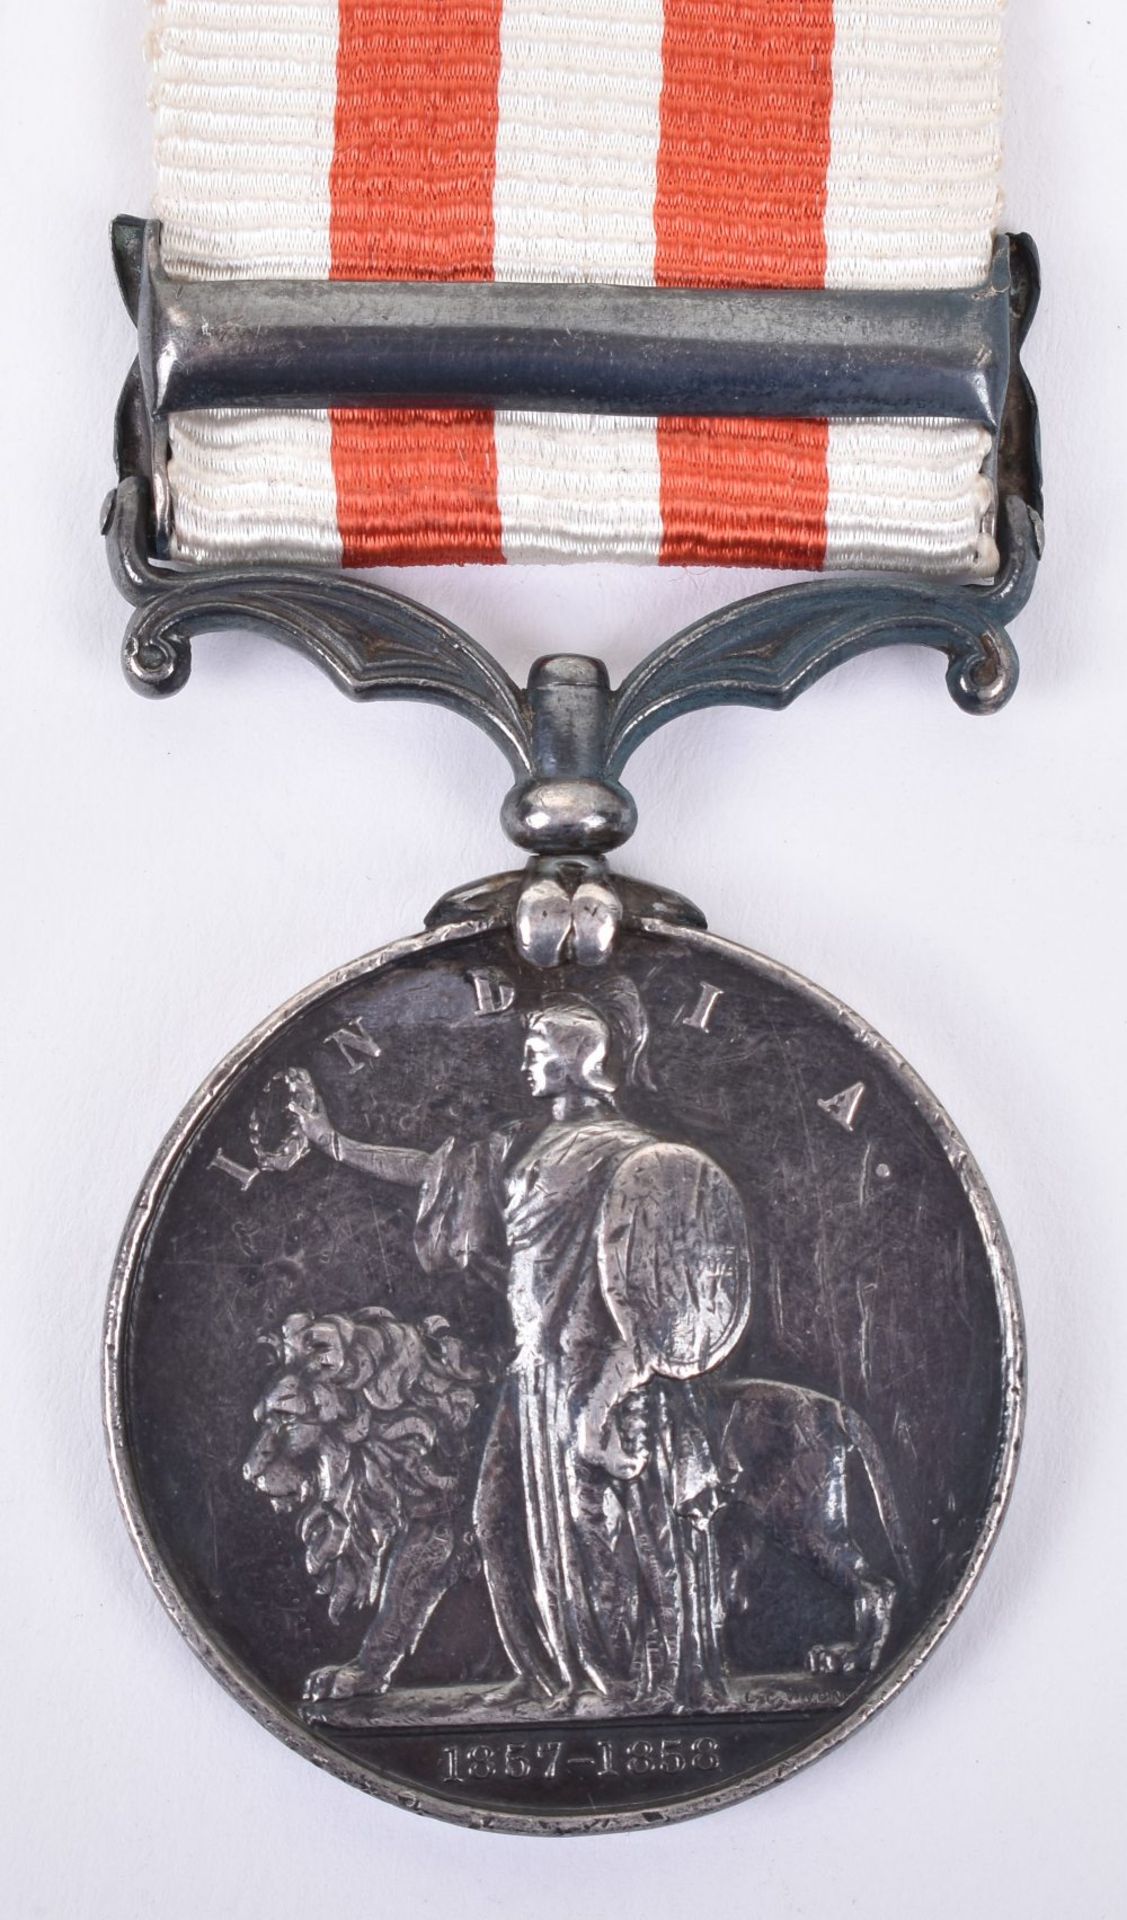 Indian Mutiny 1857-58 Campaign Medal 82nd (Prince of Wales Volunteers) Regiment of Foot - Image 3 of 3